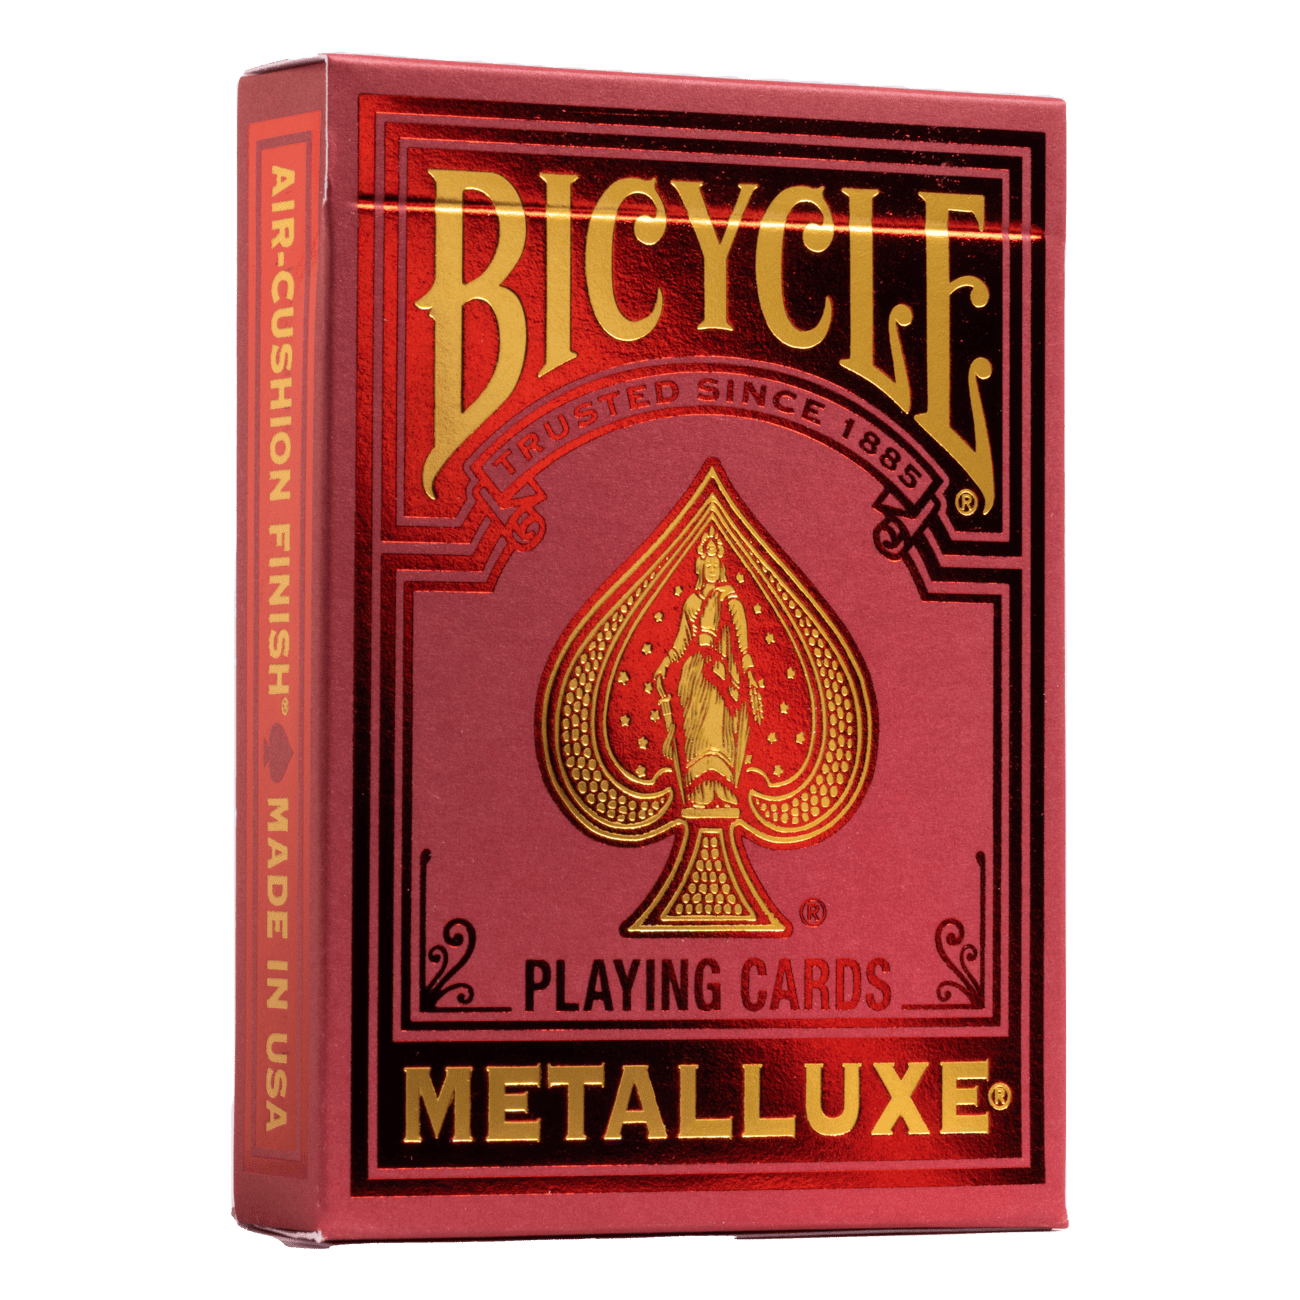 Bicycle Metalluxe Red 2022 Playing Cards